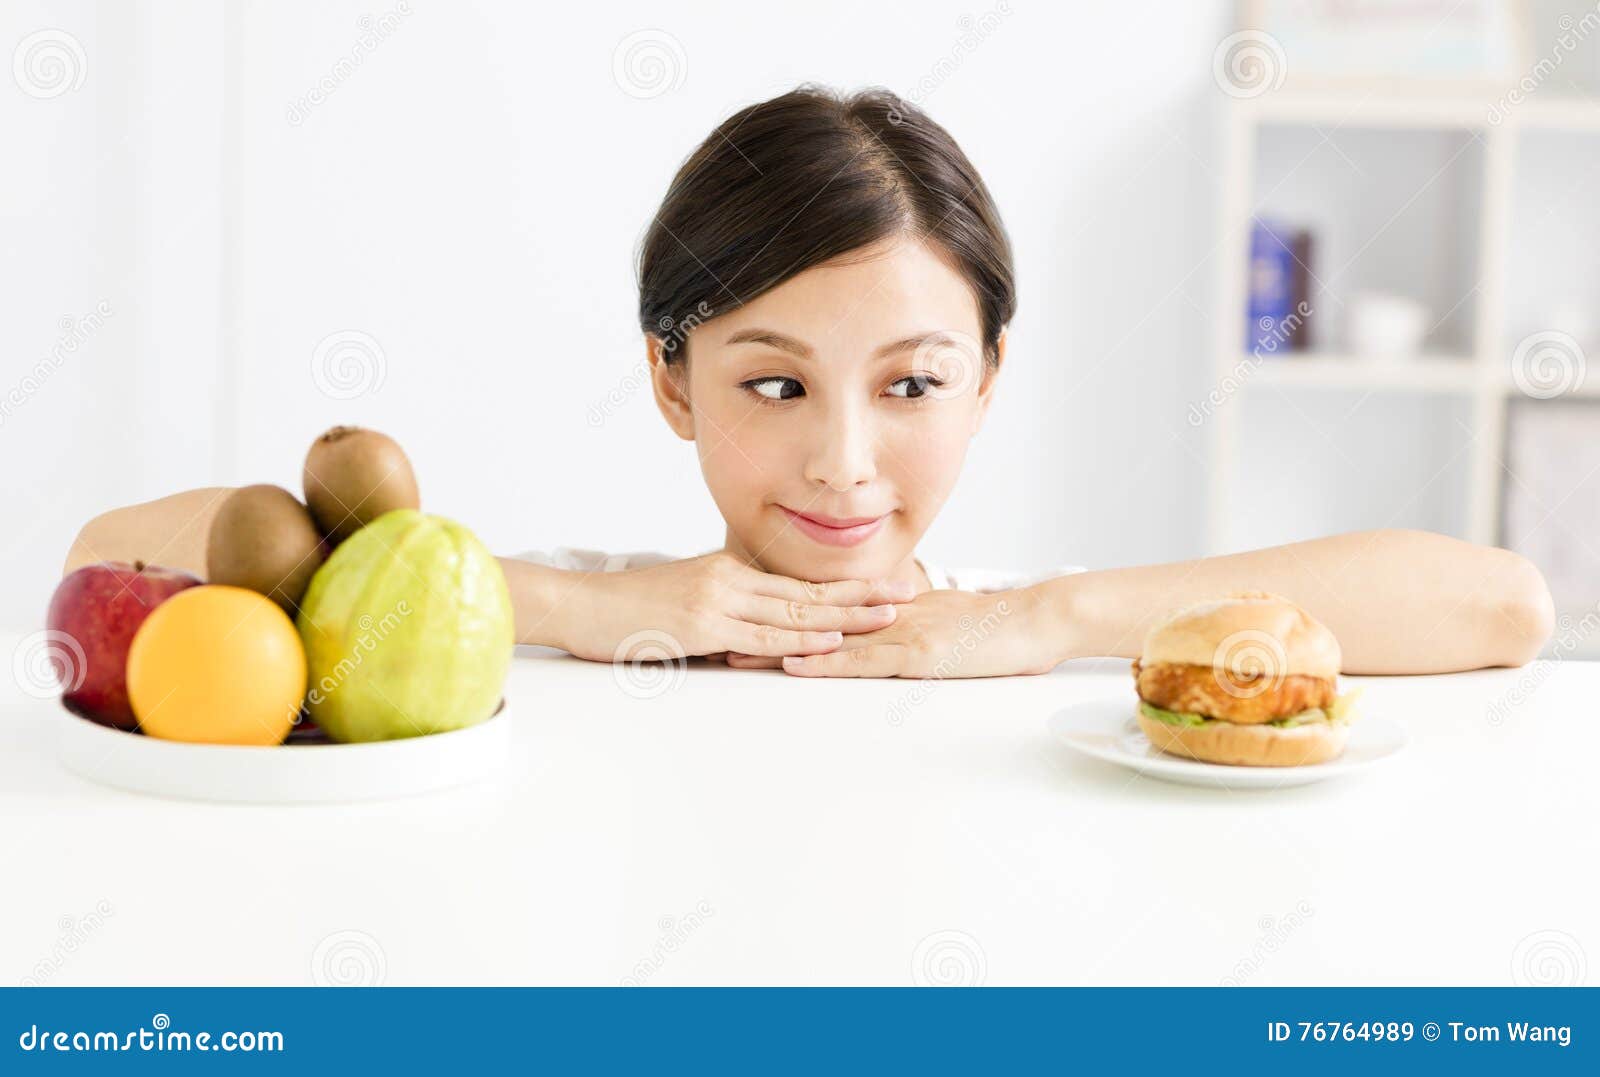 Young Woman Making Choice Between Healthy And Harmful Food Stock Image